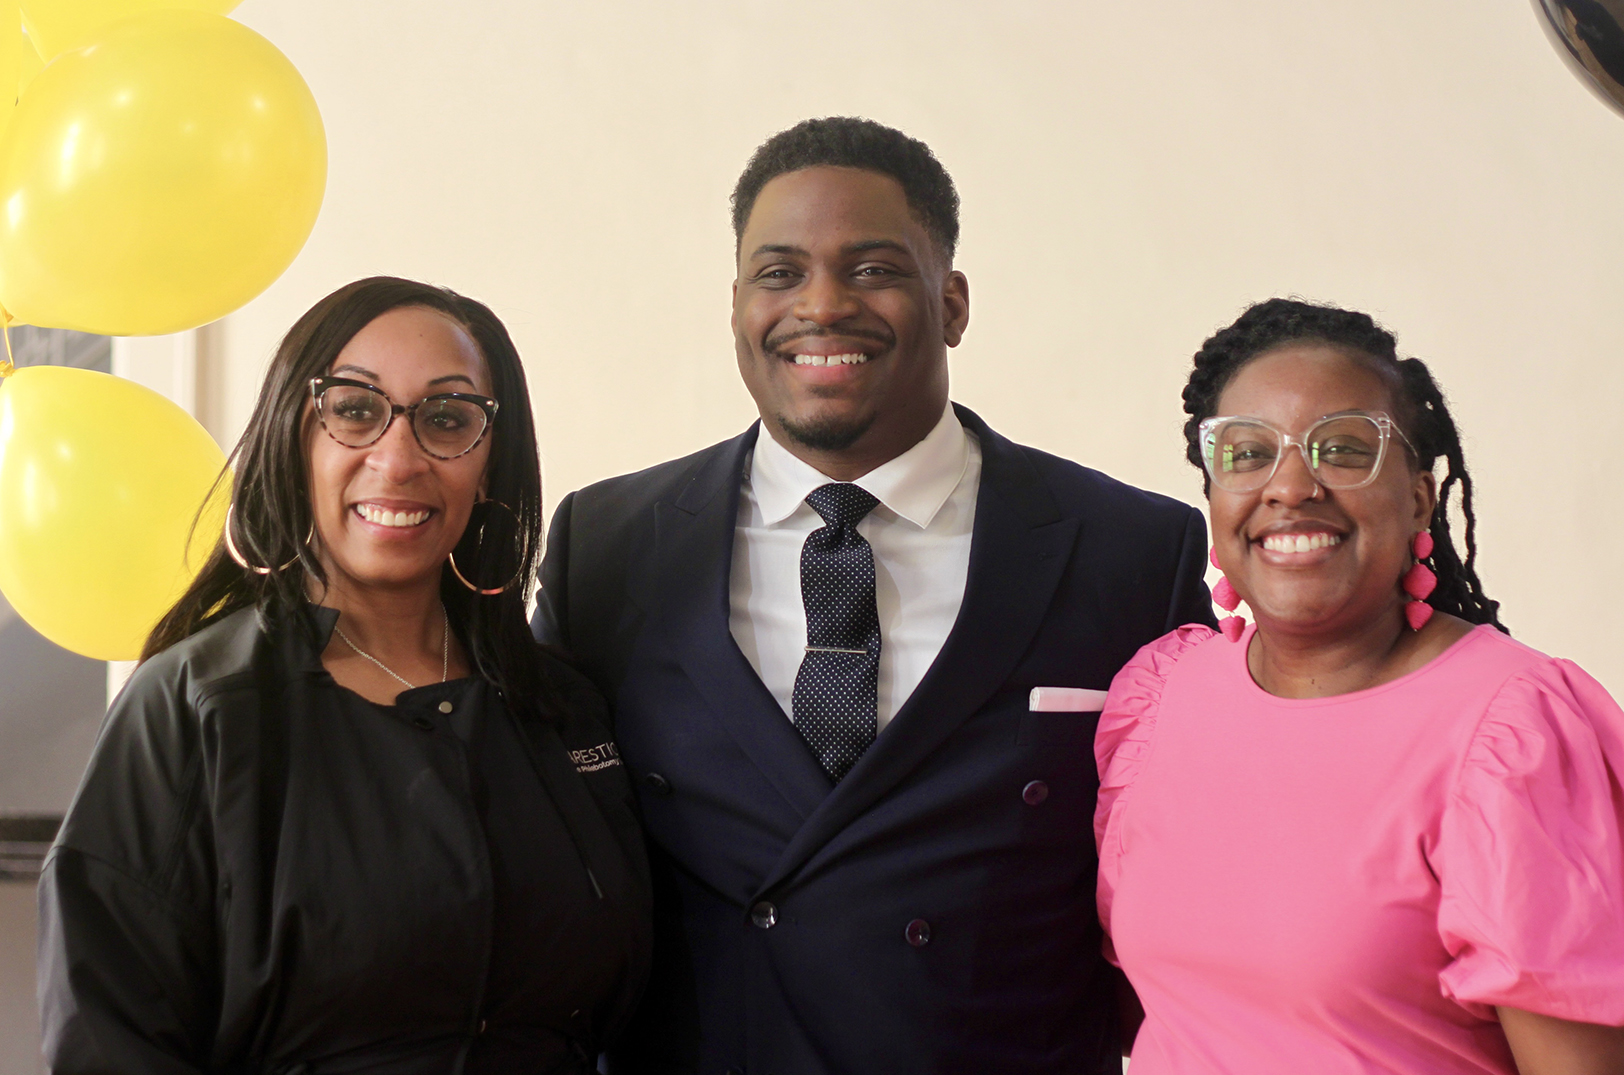 $60K in pitch competition winnings will help Black-owned businesses drive employment, book purchases